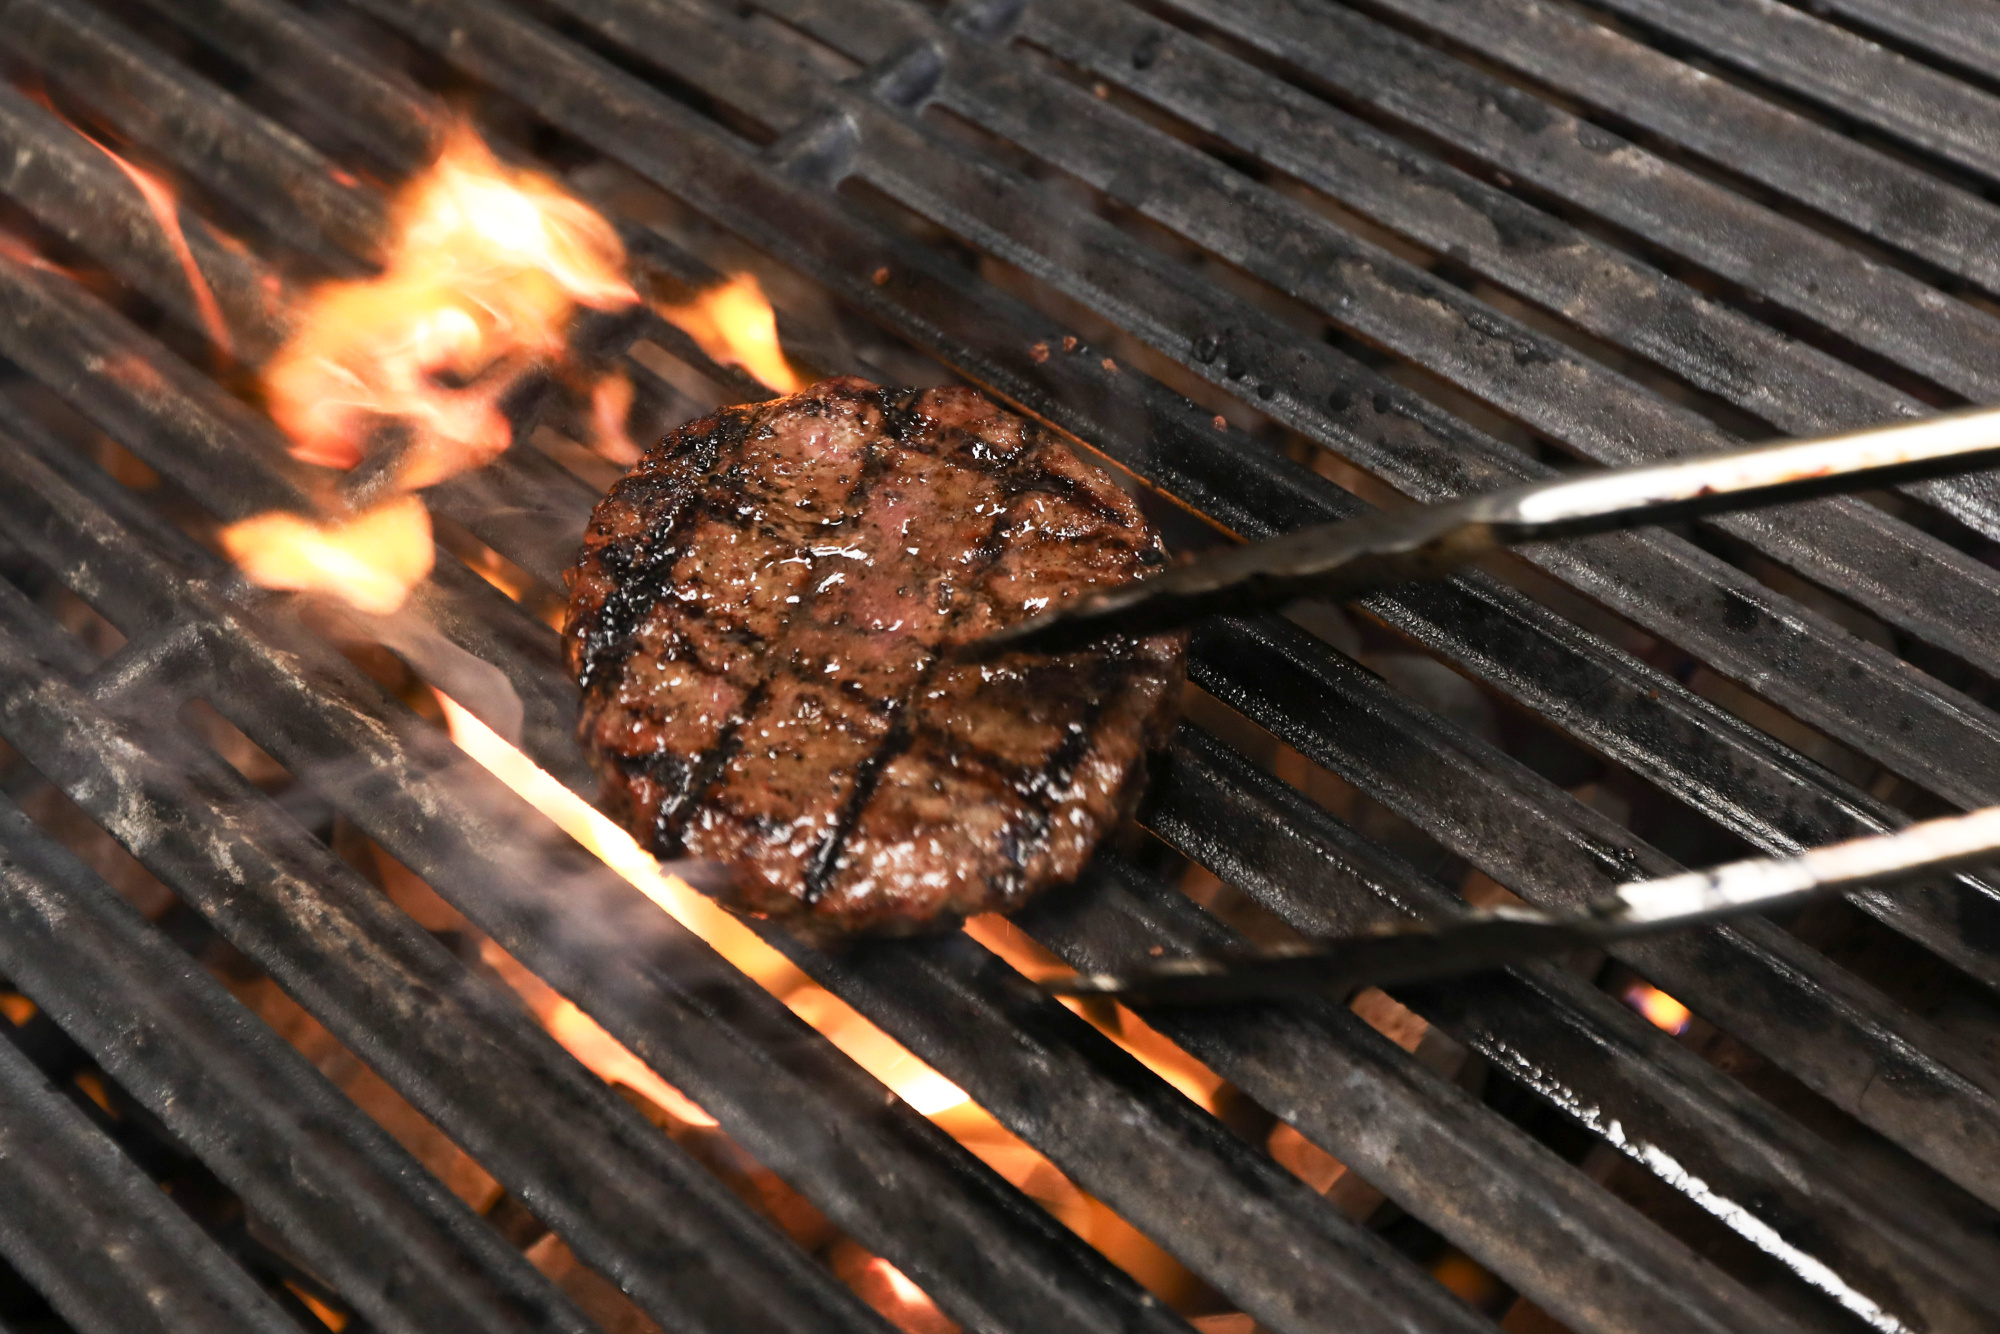 A chef cooks a burger on a grill